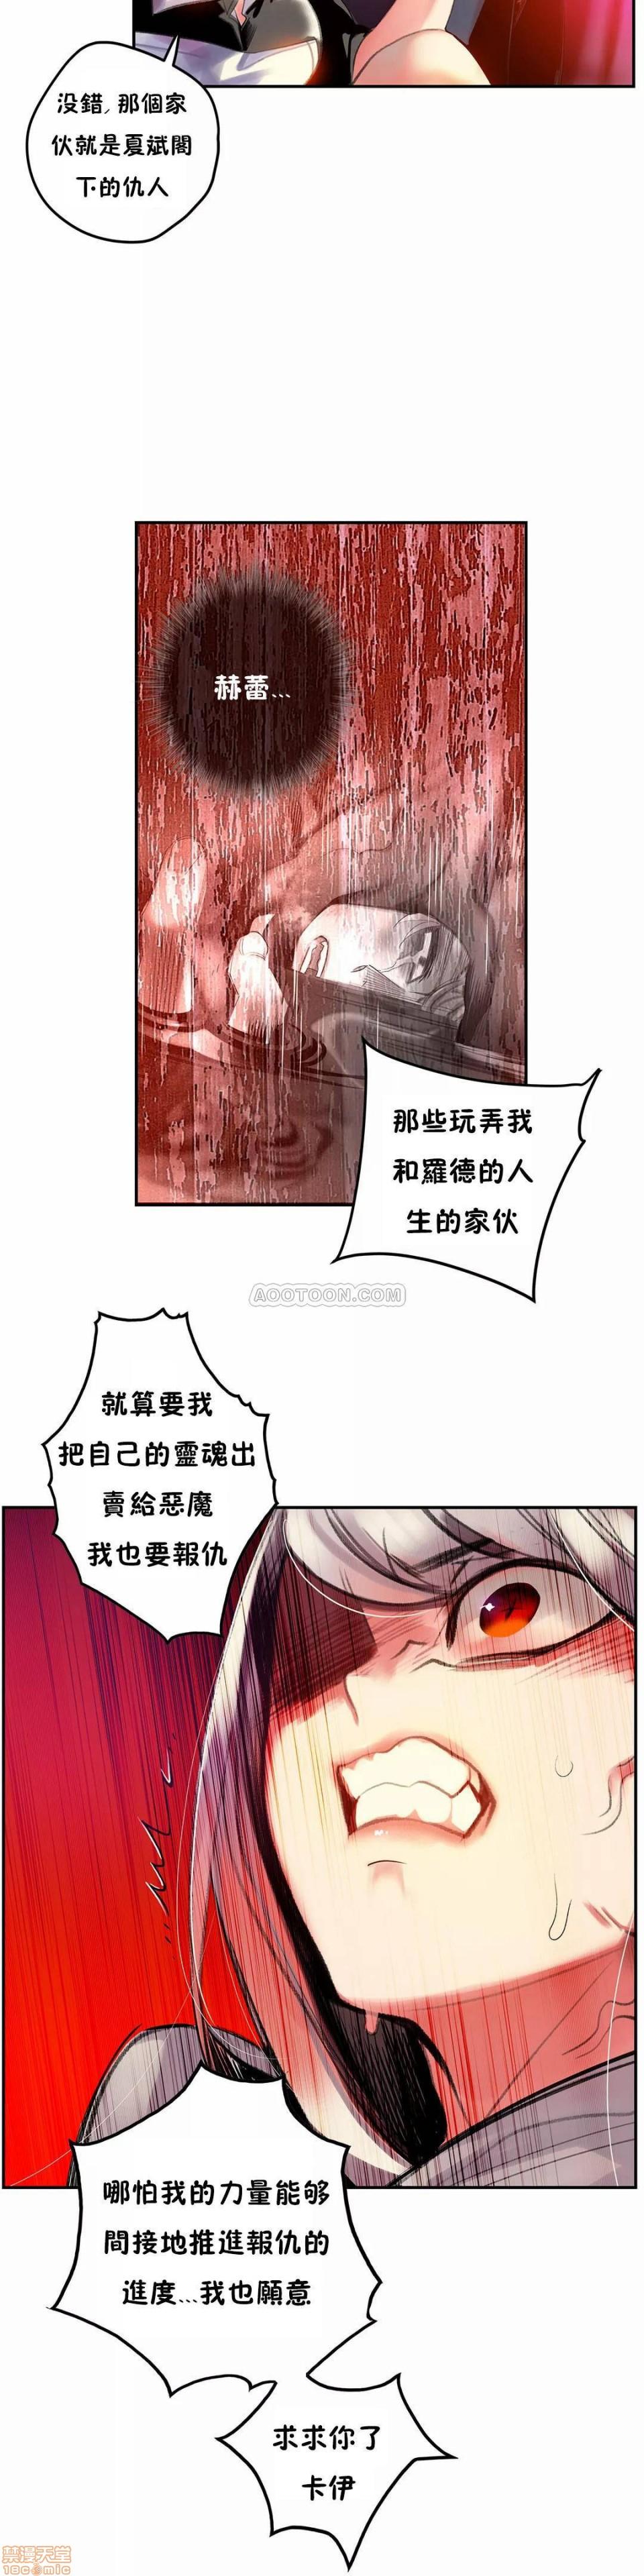 [Juder] Lilith`s Cord (第二季) Ch.77-93 end [Chinese] 11